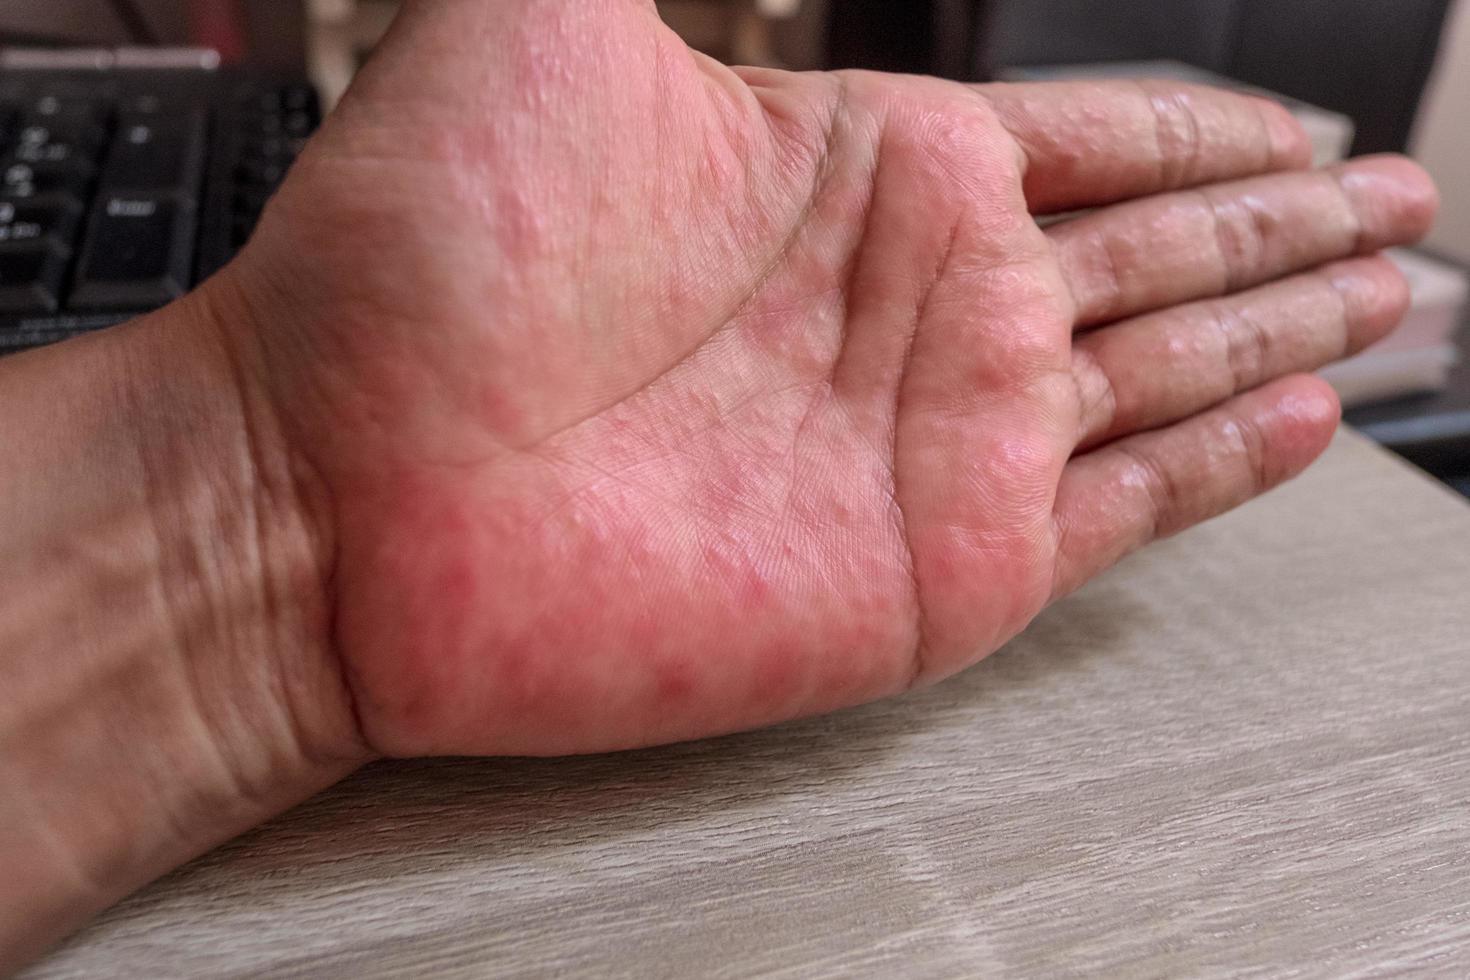 Hands with rash. Red sports on the hand, palm and fingers. photo